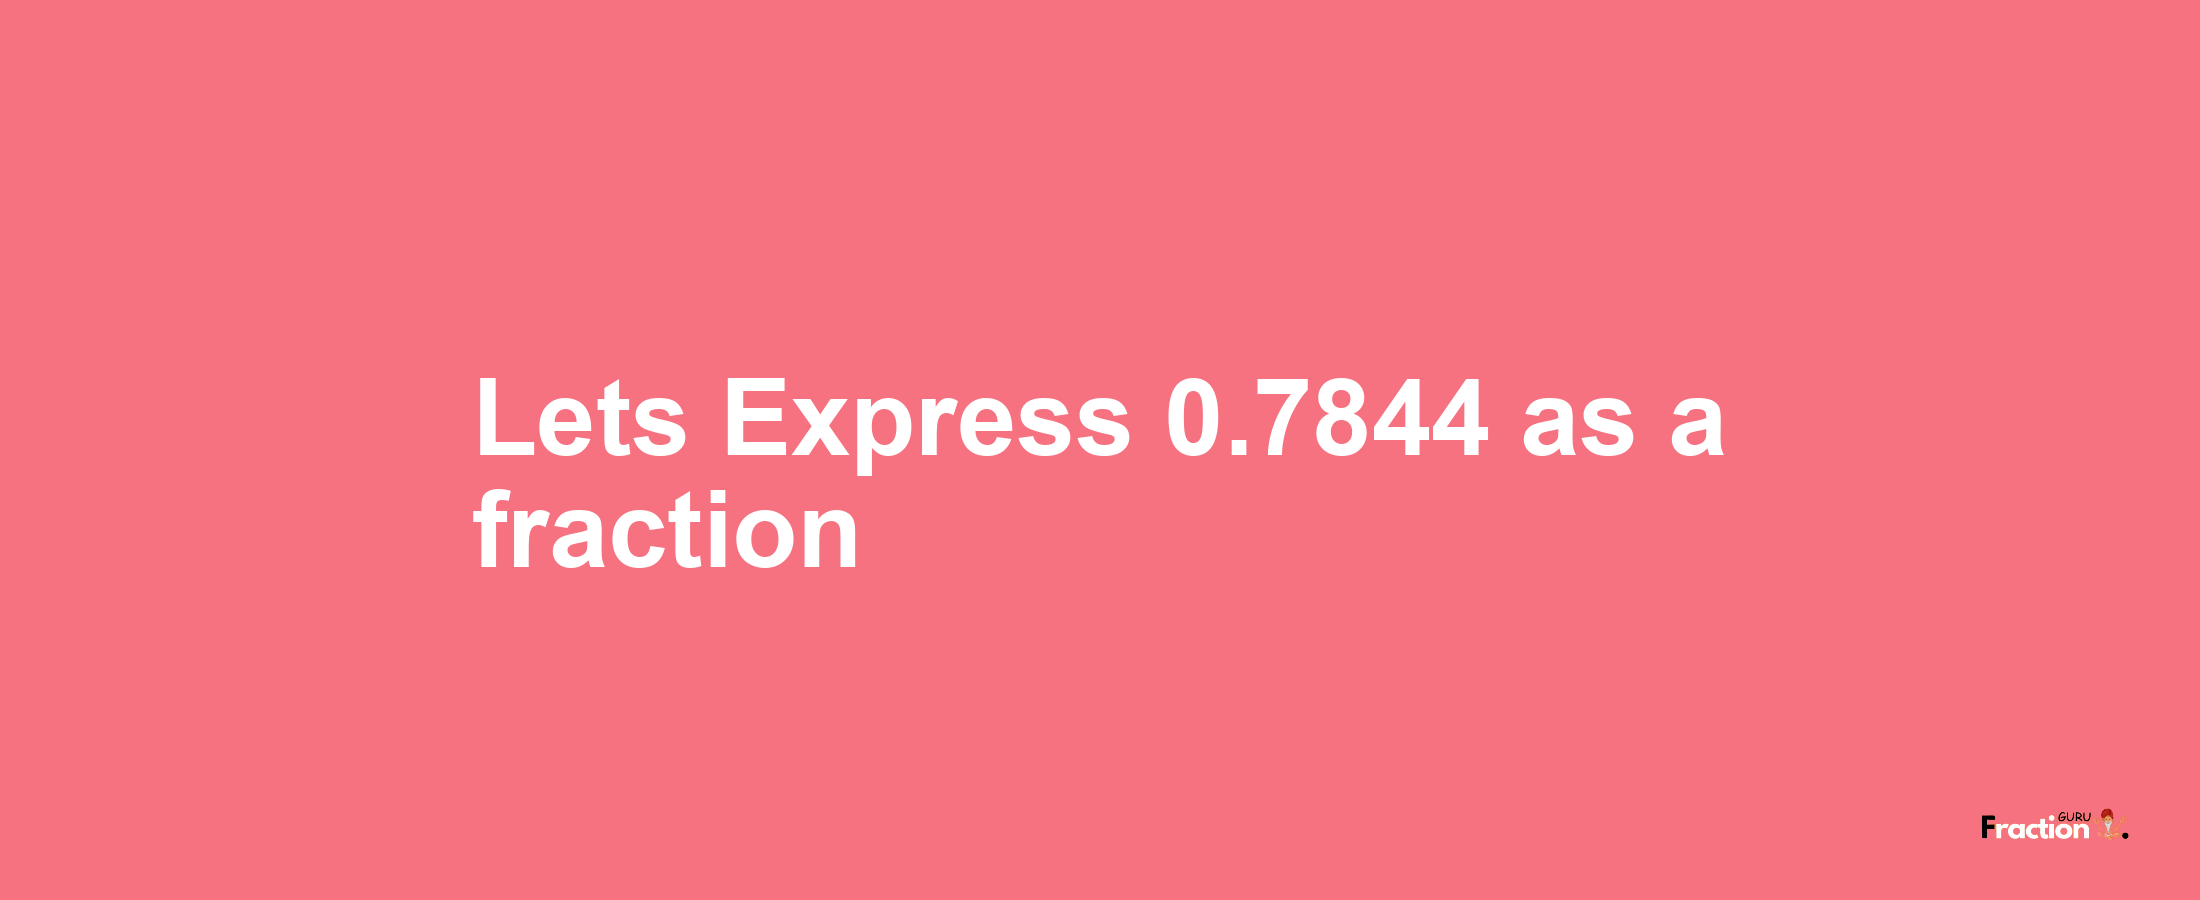 Lets Express 0.7844 as afraction